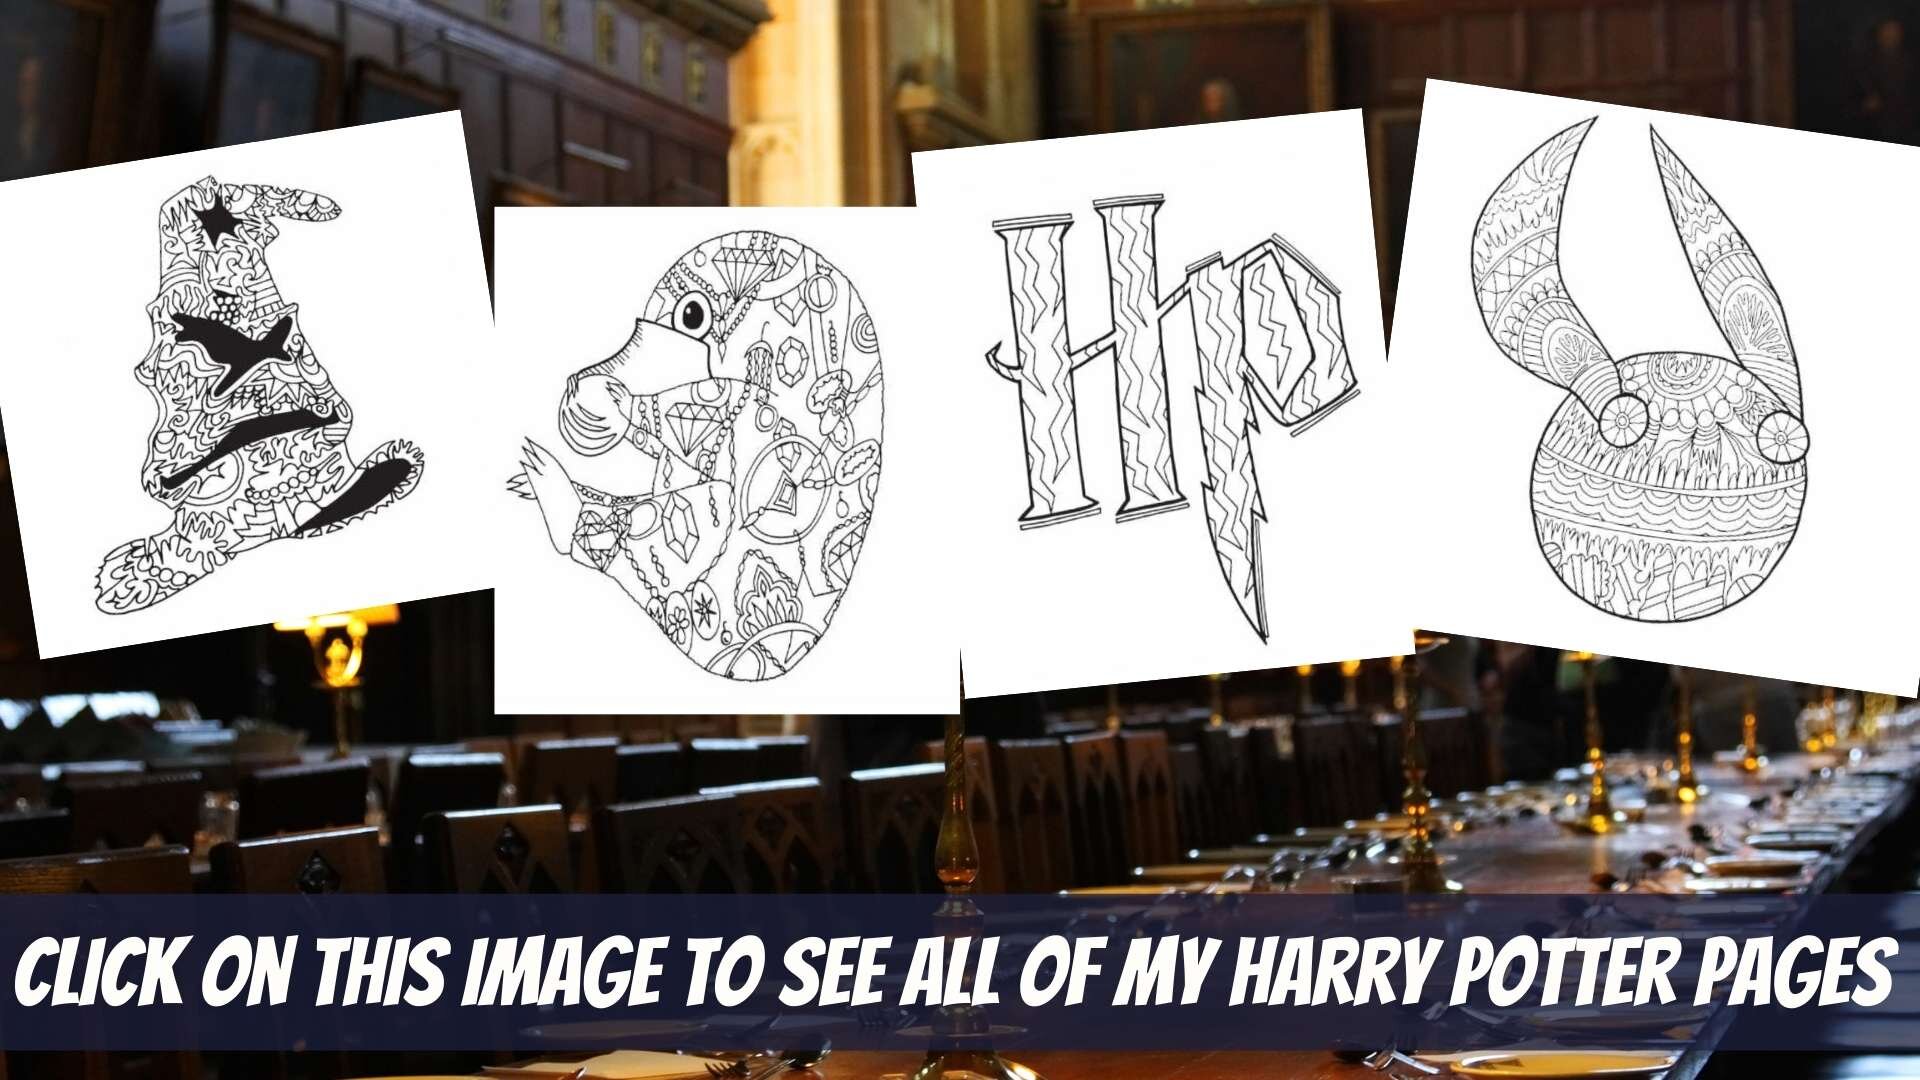 link to the whole Harry Potter collection